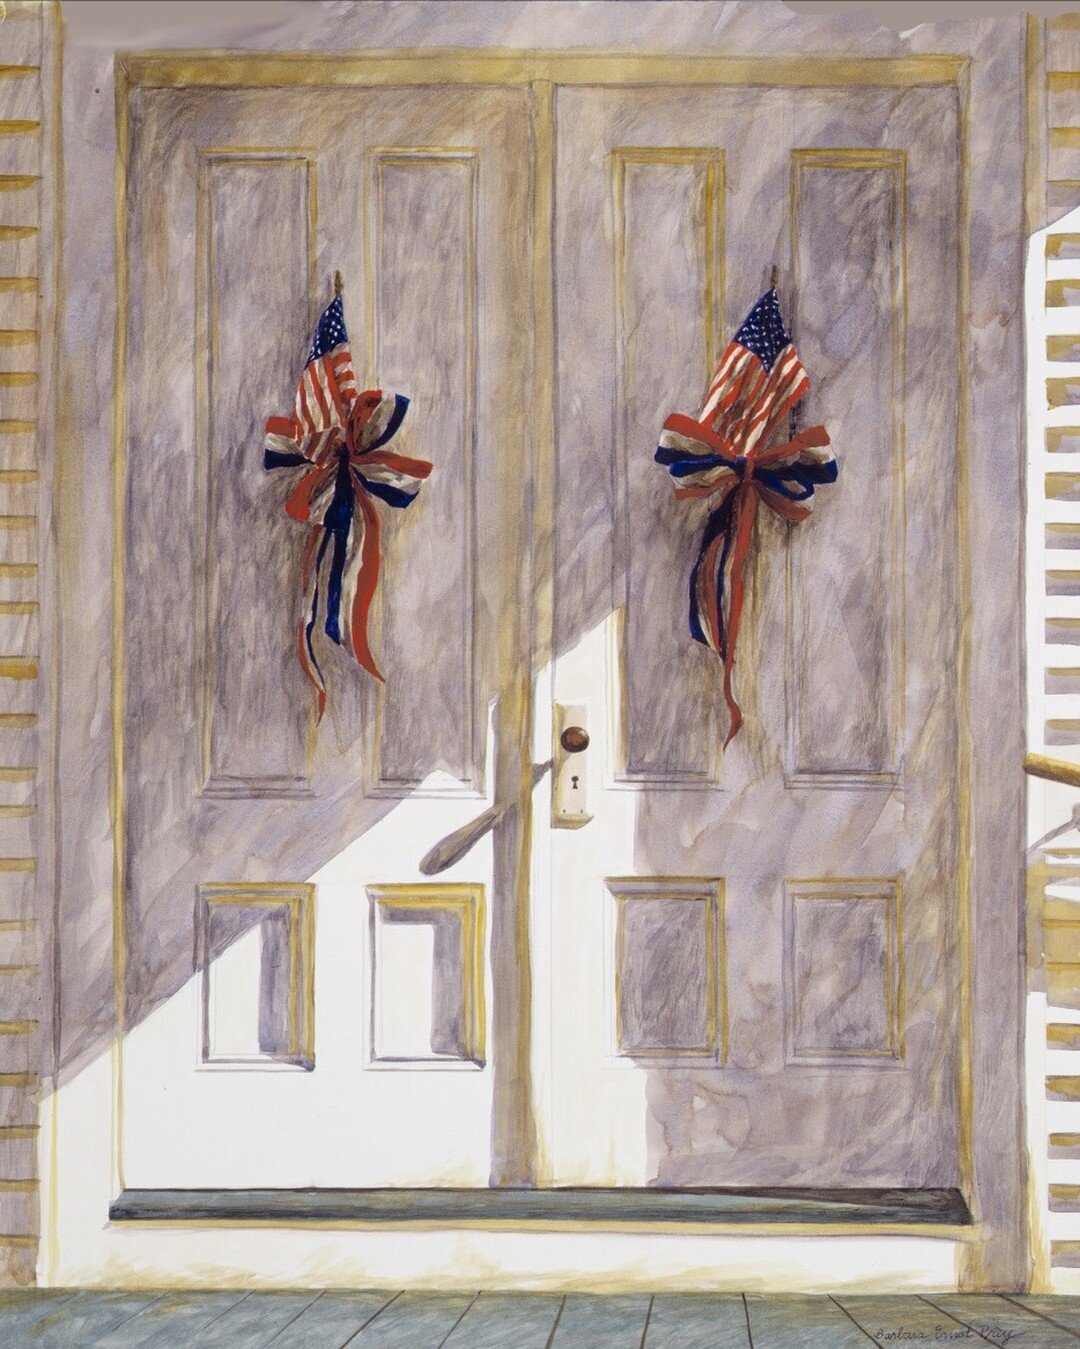 This year marks 20 years since the tragic terrorist attacks of September 11, 2001. Pictured here is &quot;God and Country,&quot; Watercolor on Paper, 22&quot; x 30,&quot; which Barbara painted in 2002 as a part of her &quot;An Artist's Response to 9/